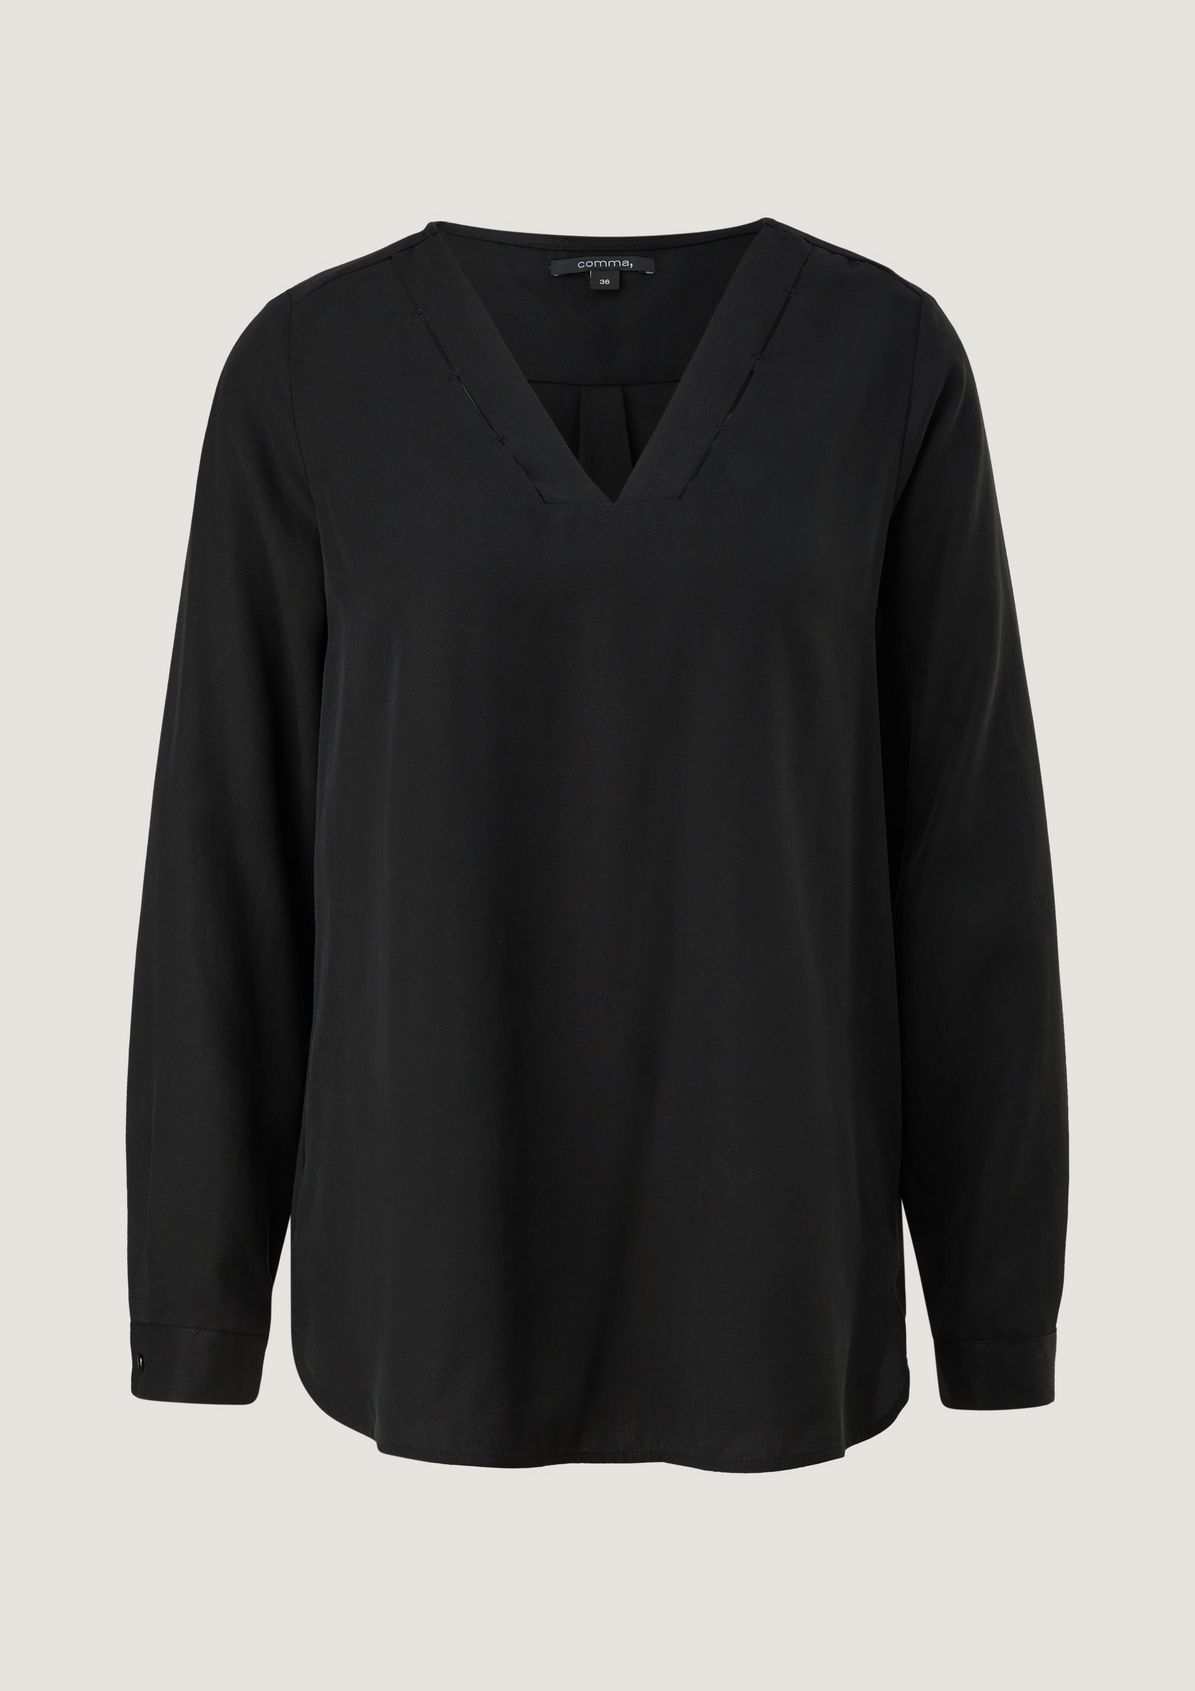 Blouse with cut-outs on the collar from comma